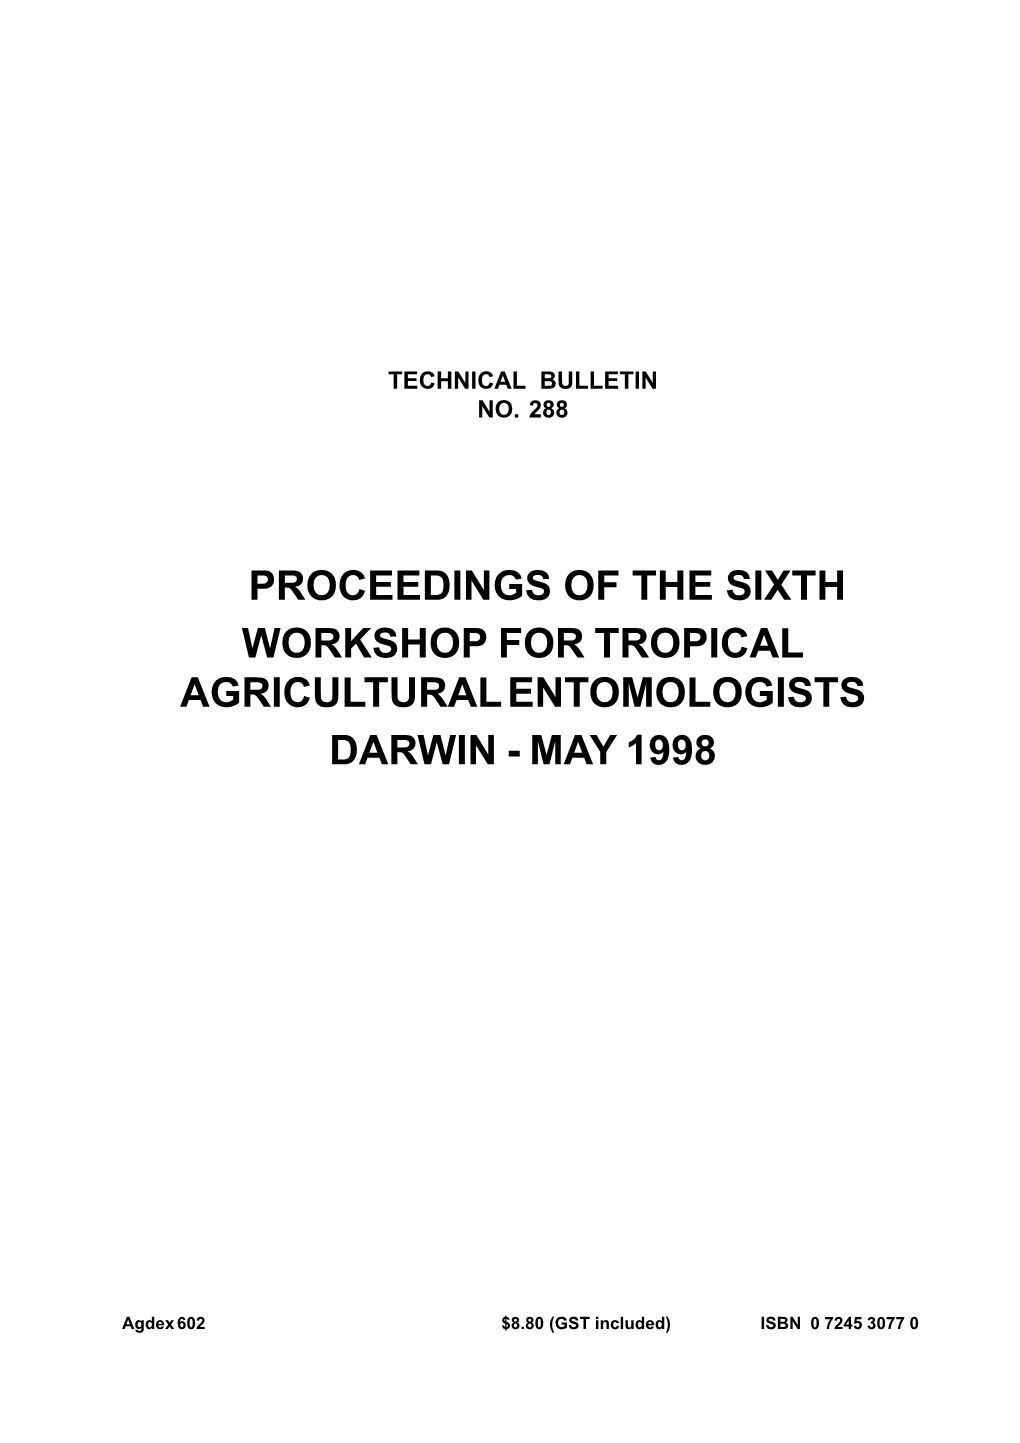 Proceedings of the Sixth Workshop on Tropical Agricultural Entomology